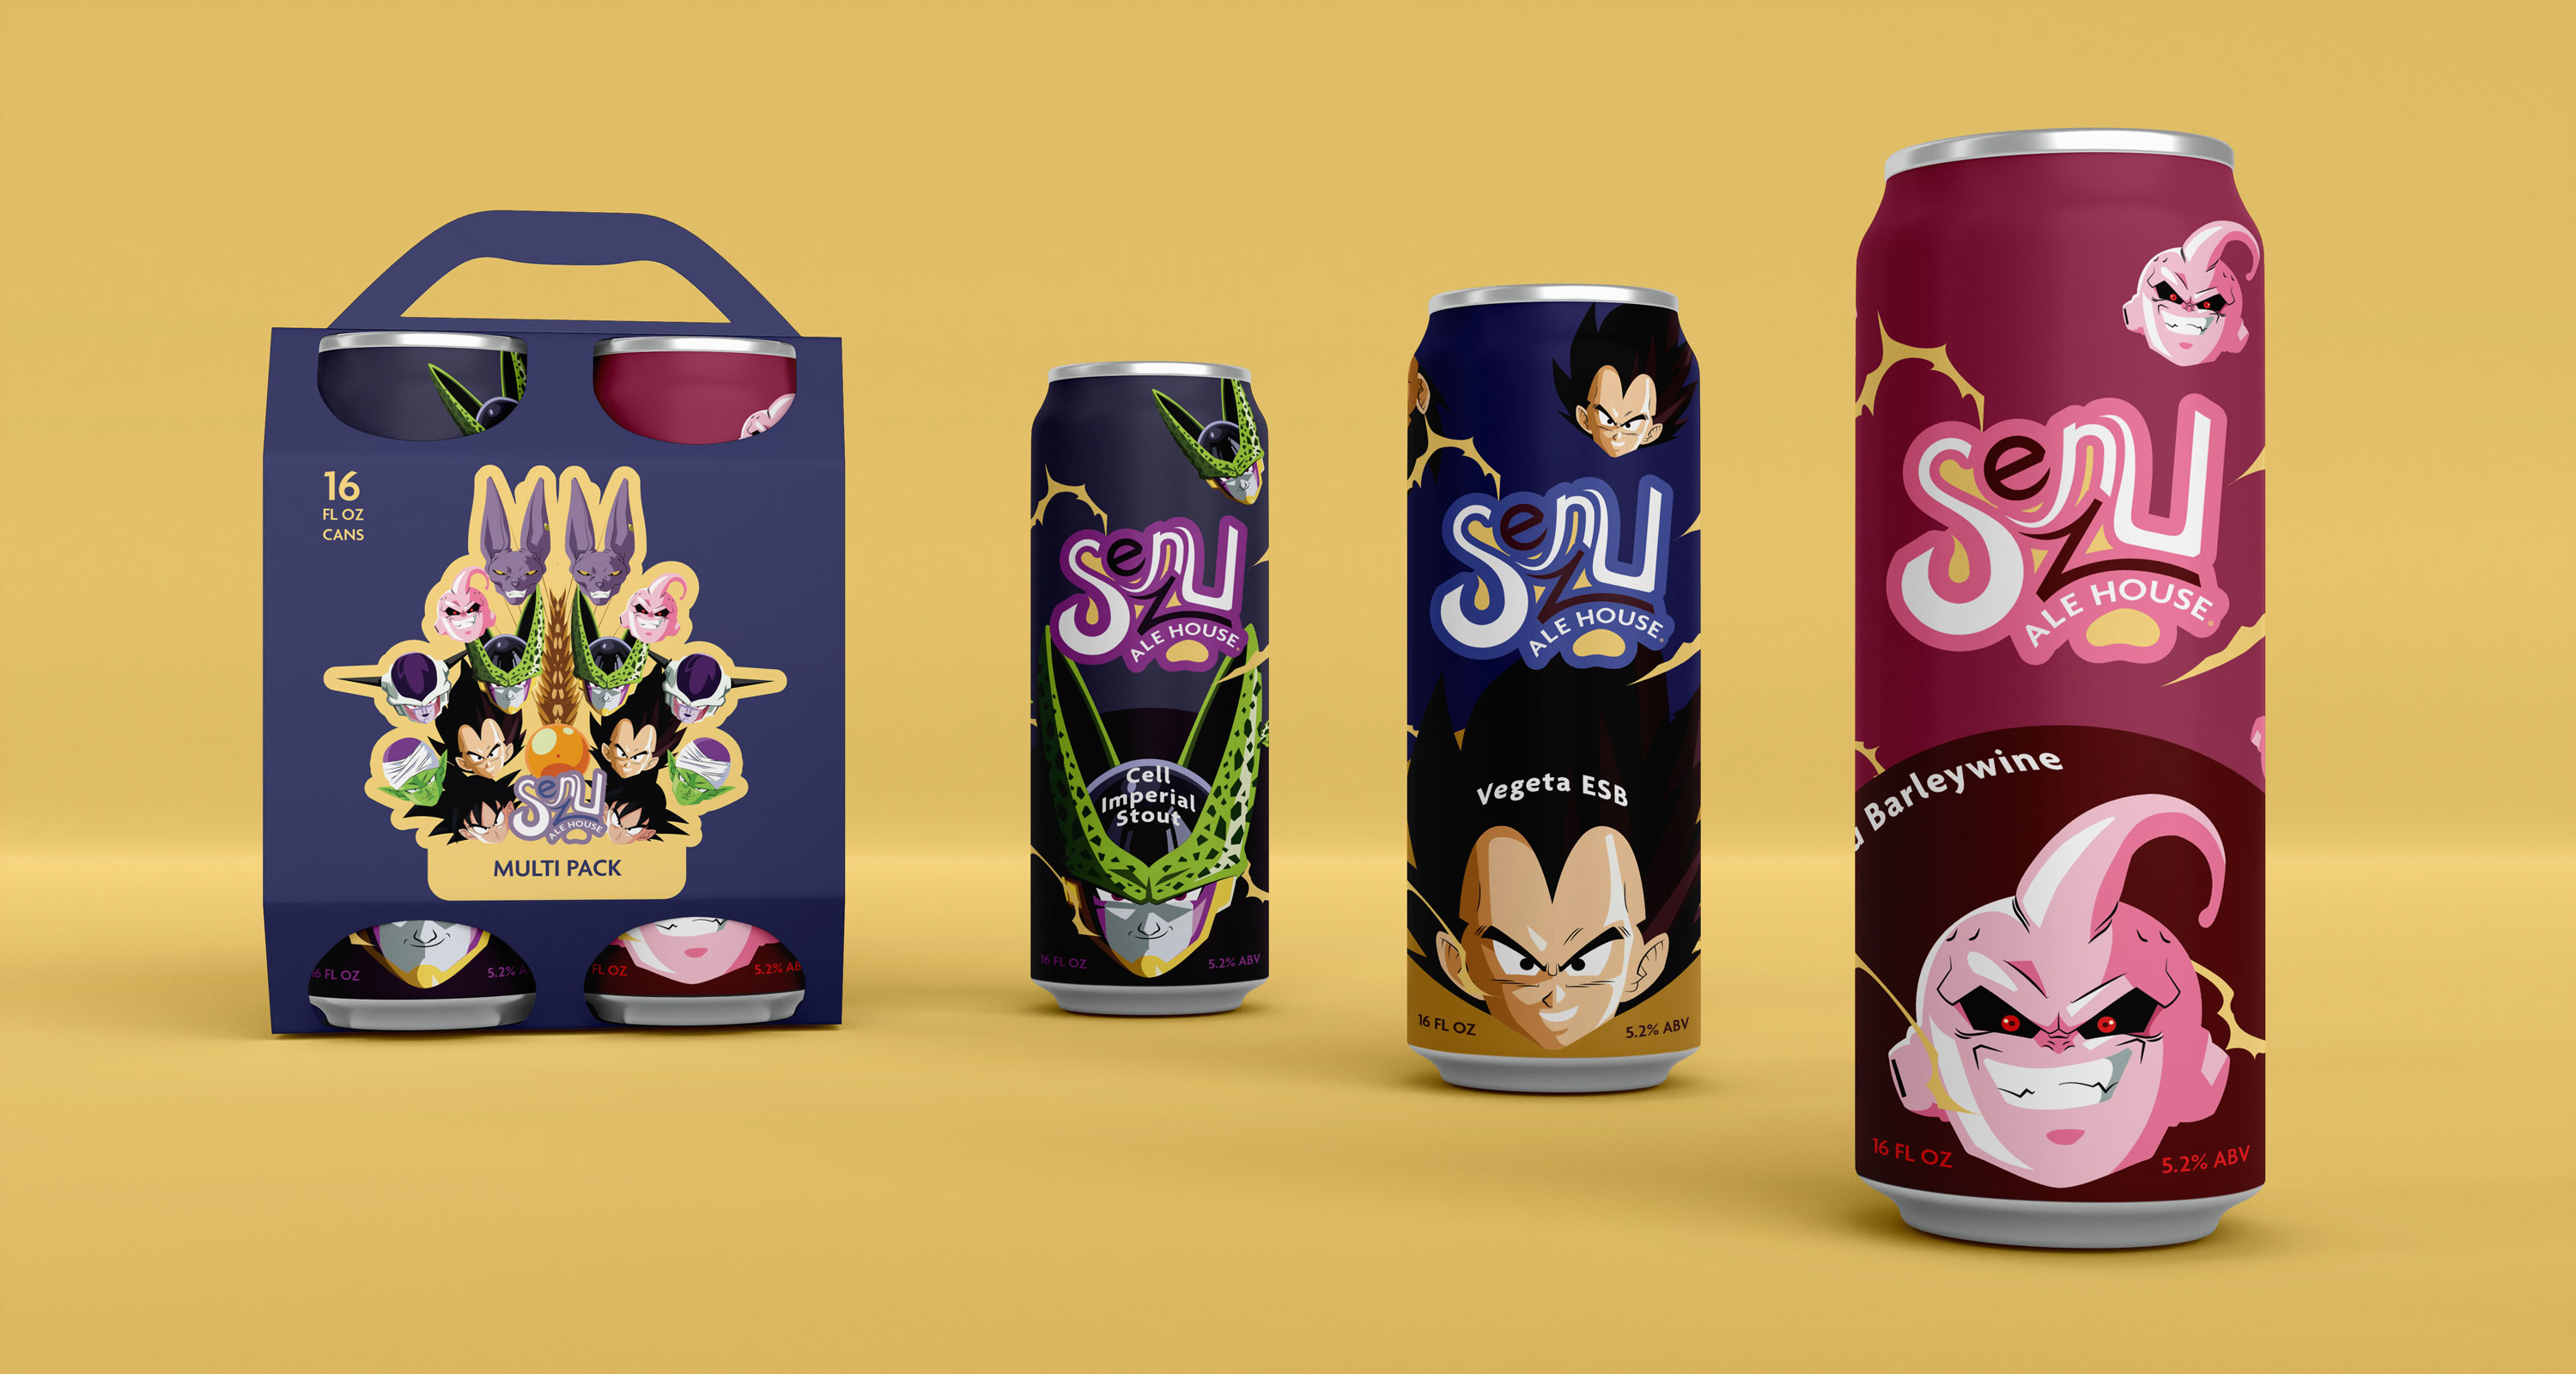 Senzu Ale House box and beer cans